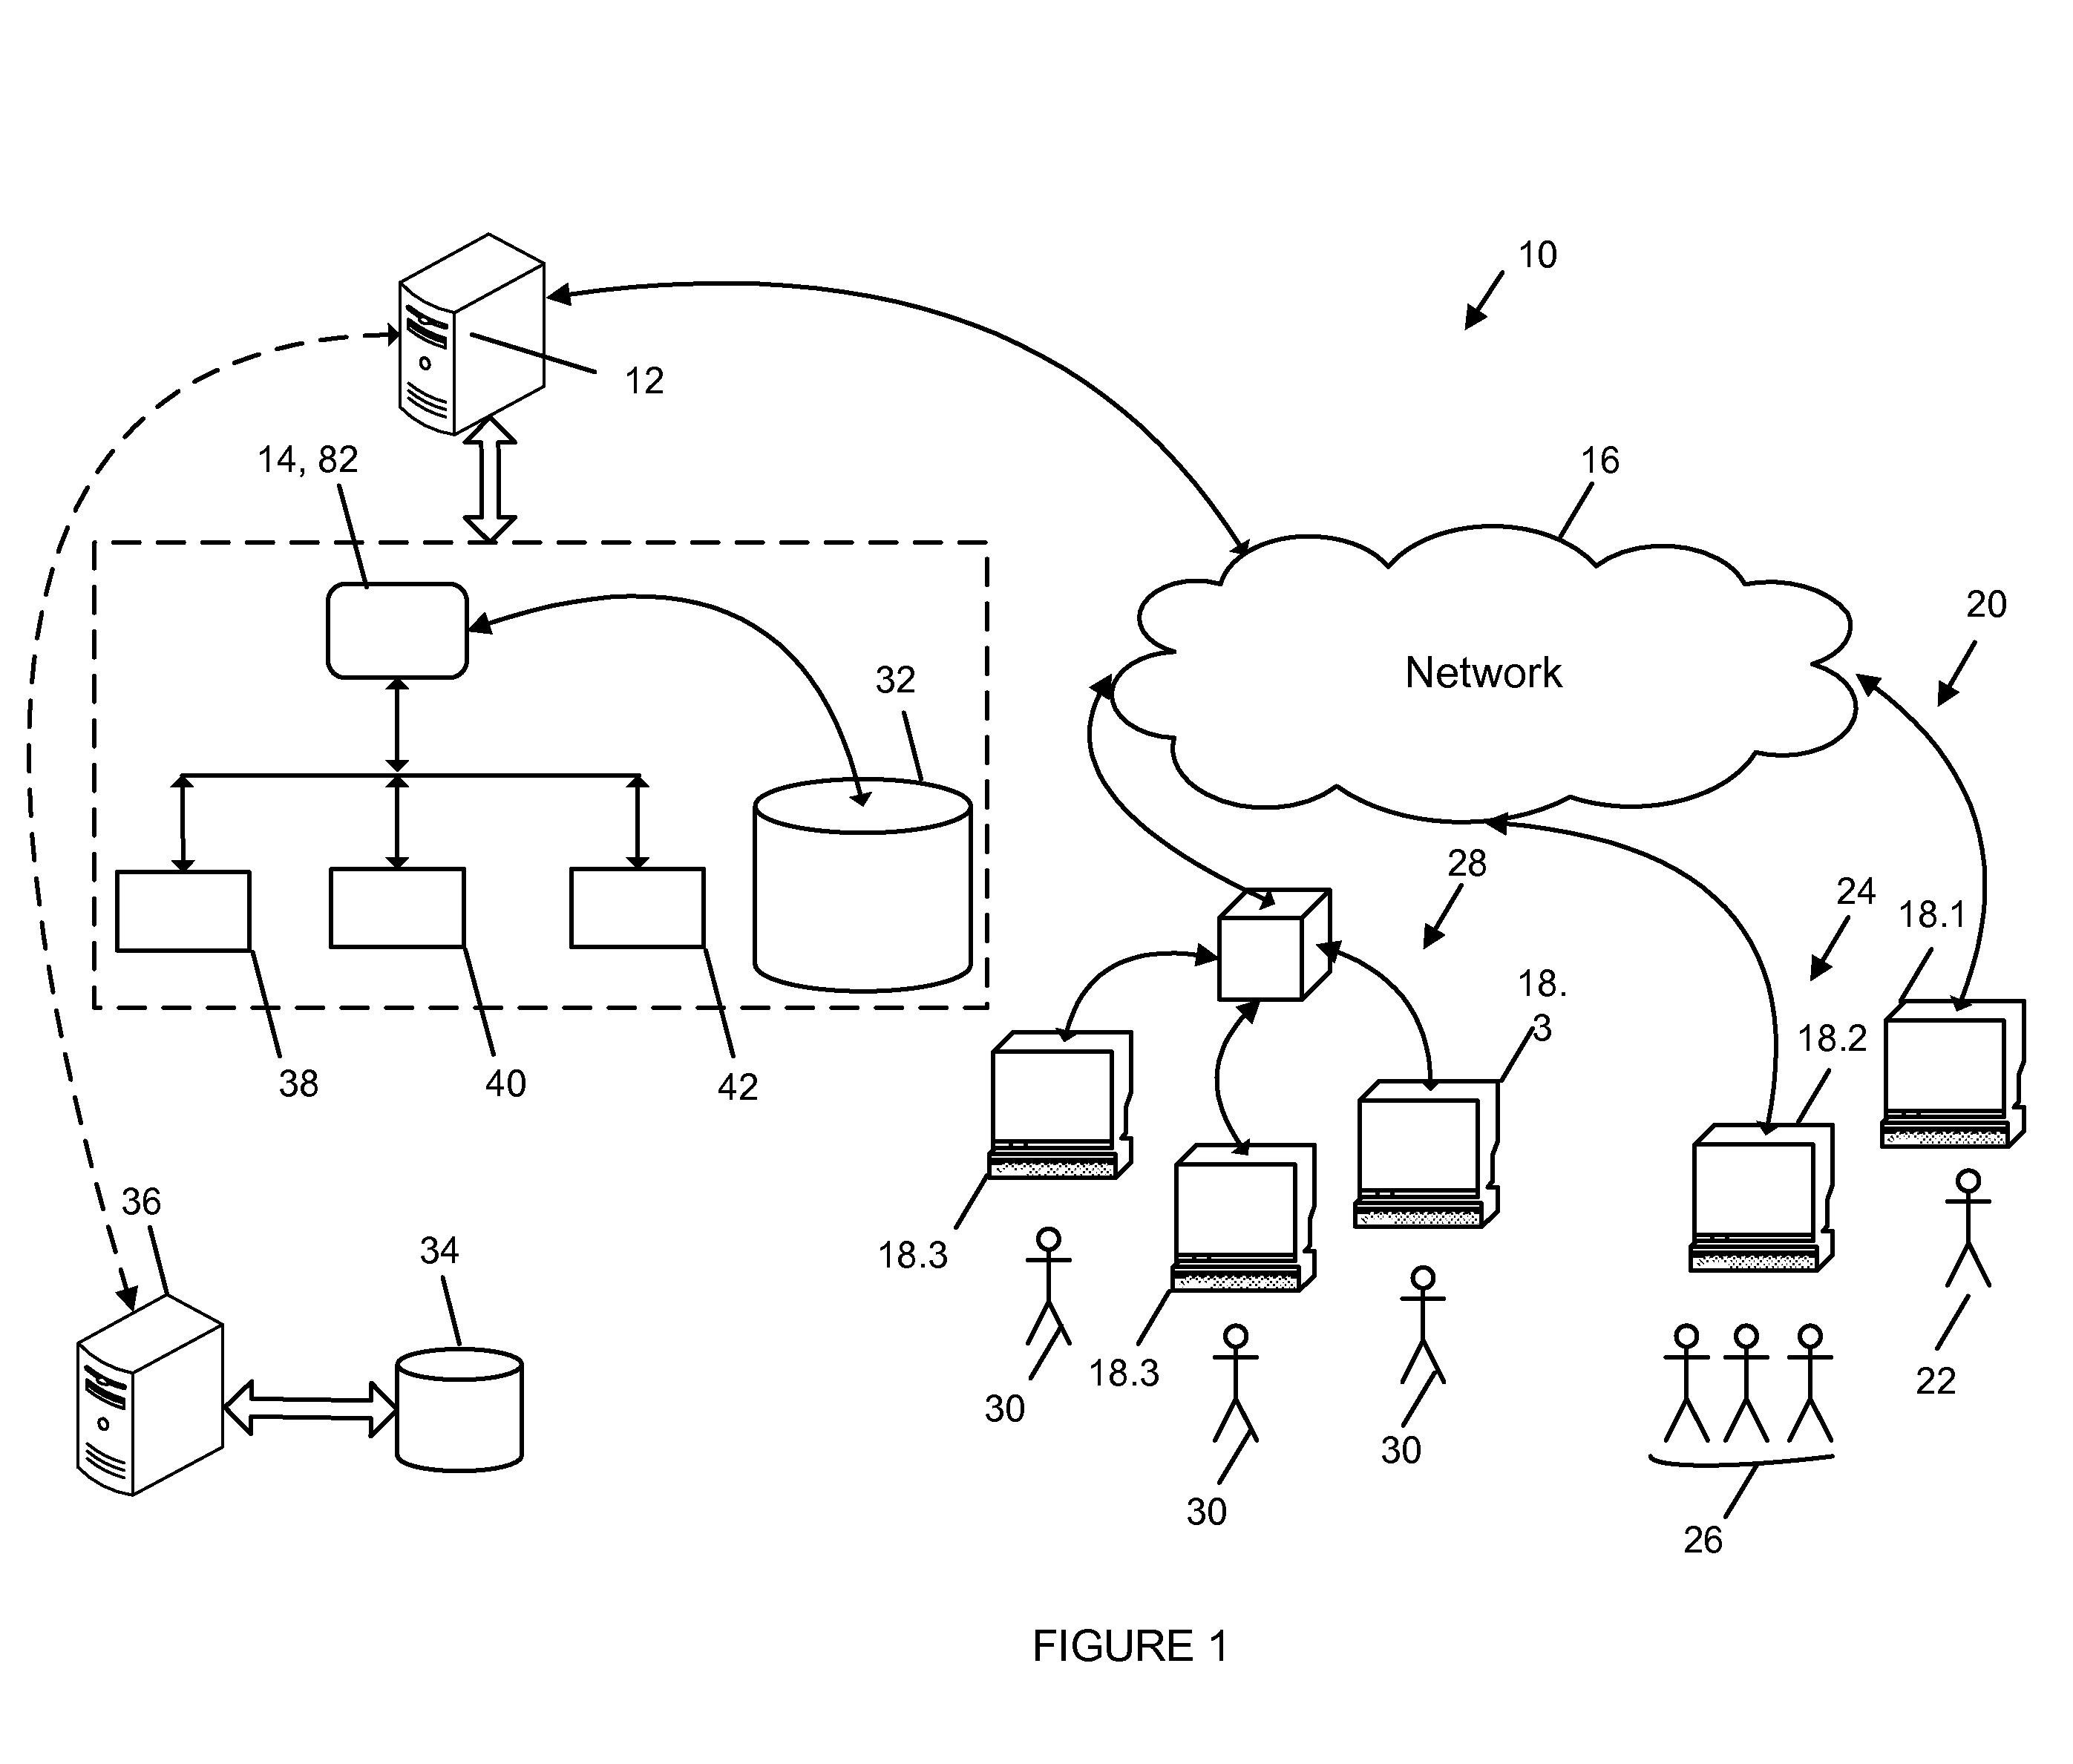 User Authentication System for Detecting and Controlling Fraudulent Login Behavior